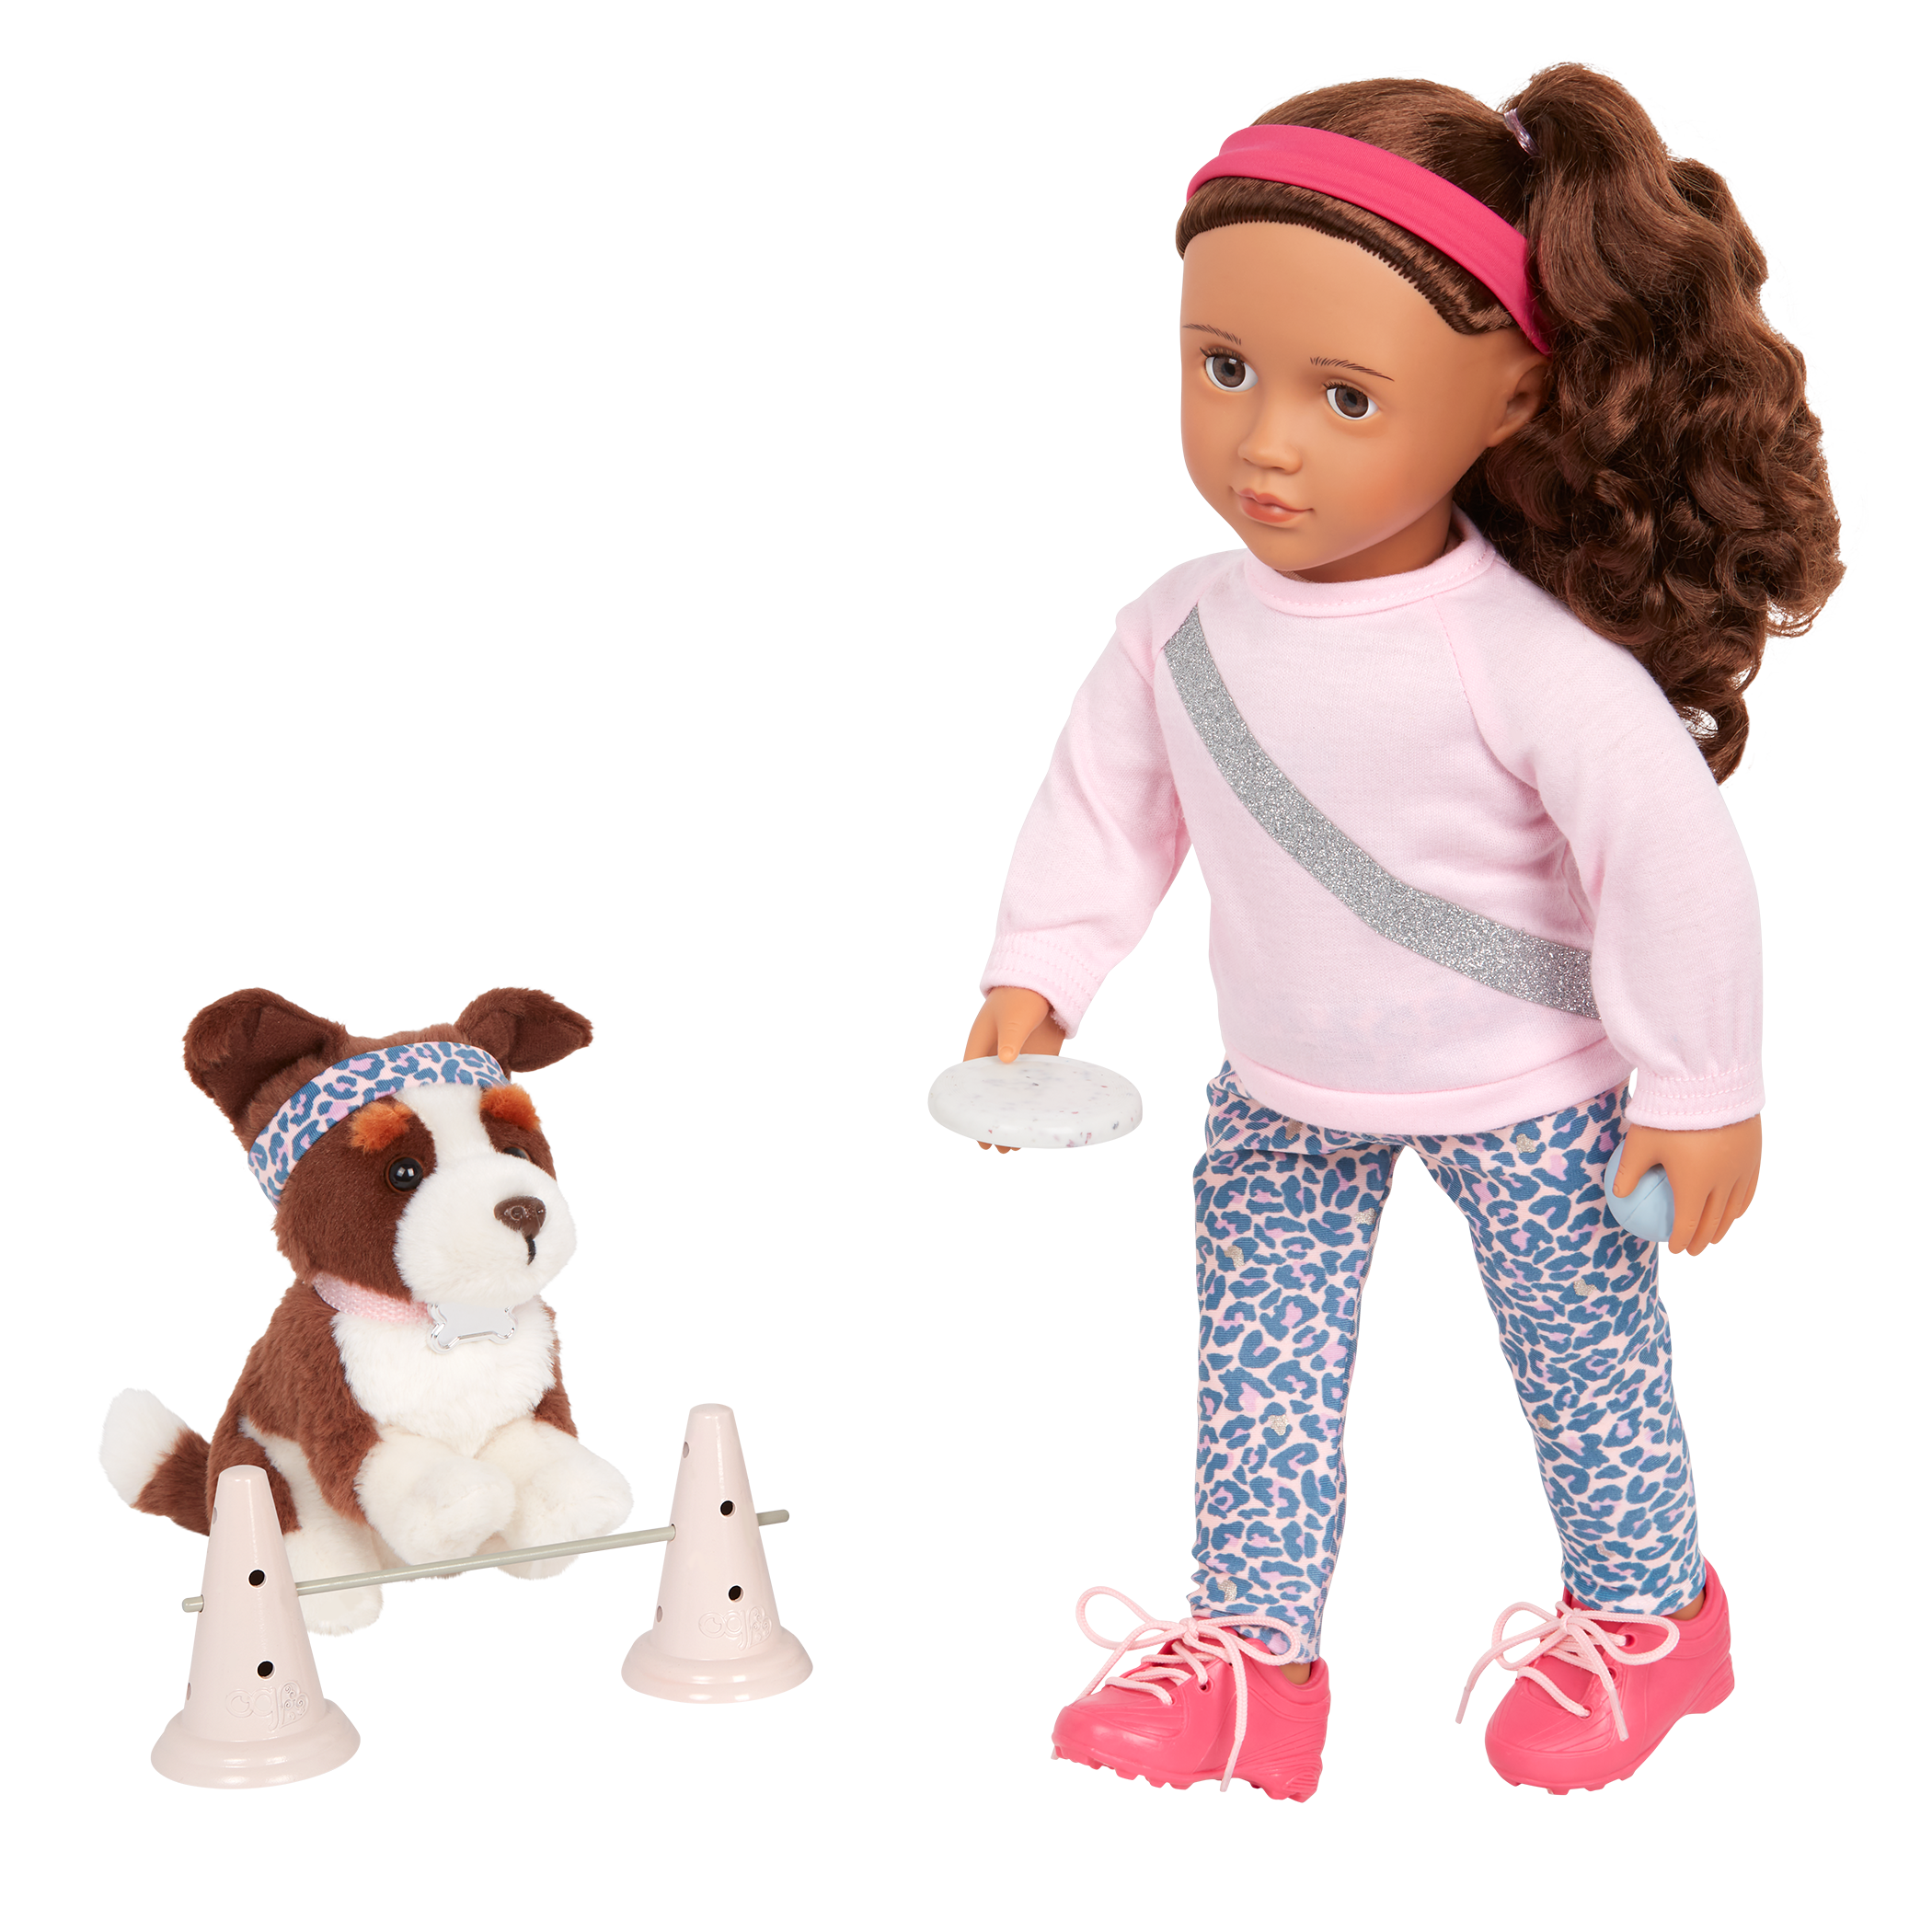 Our Generation 18-inch Dog Trainer Doll Natalia & Pet Plush Nillie